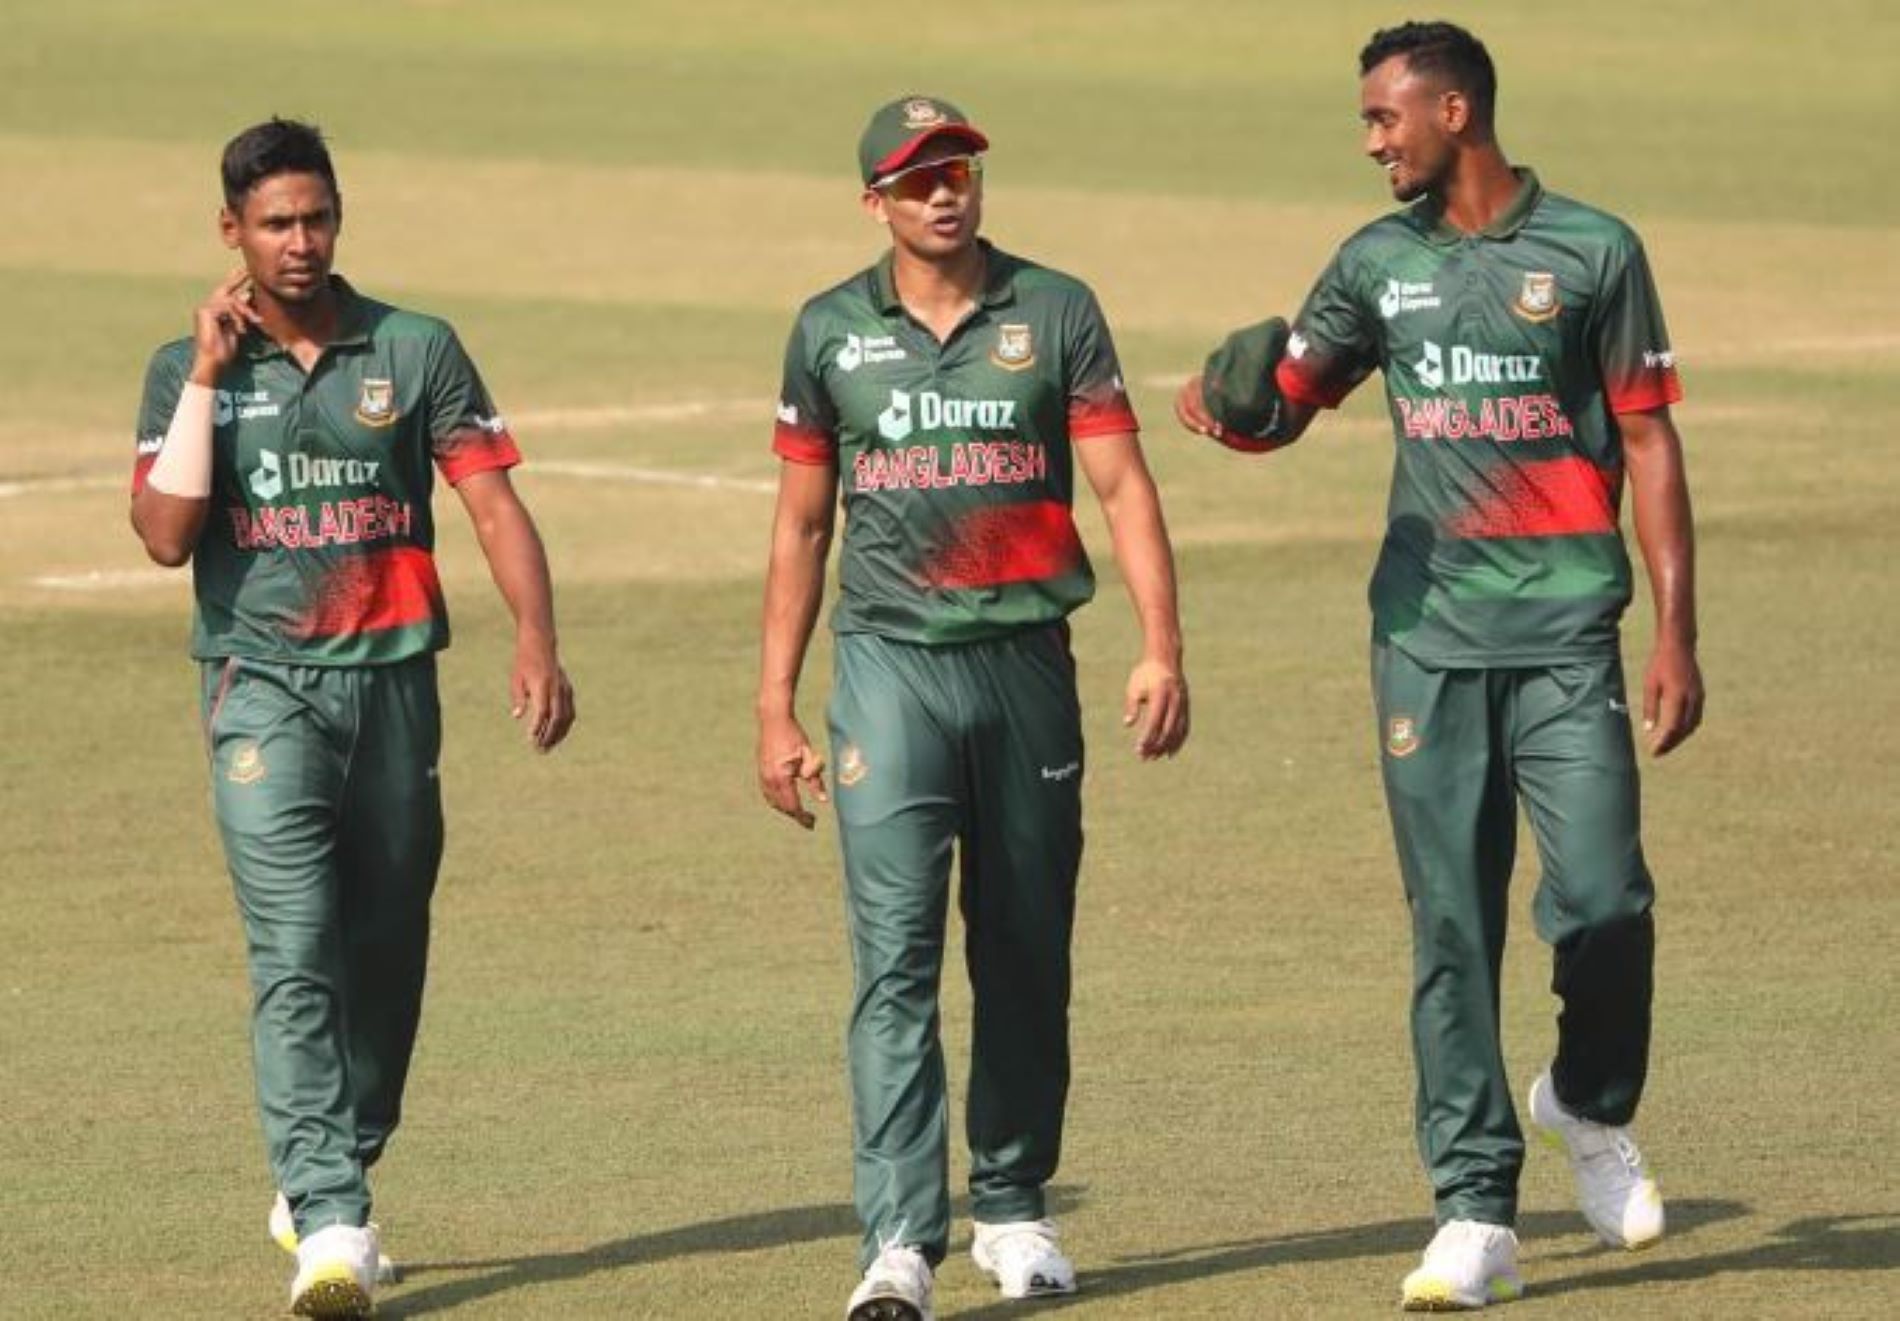 Bangladesh will rely heavily on this pace trio during the World Cup.